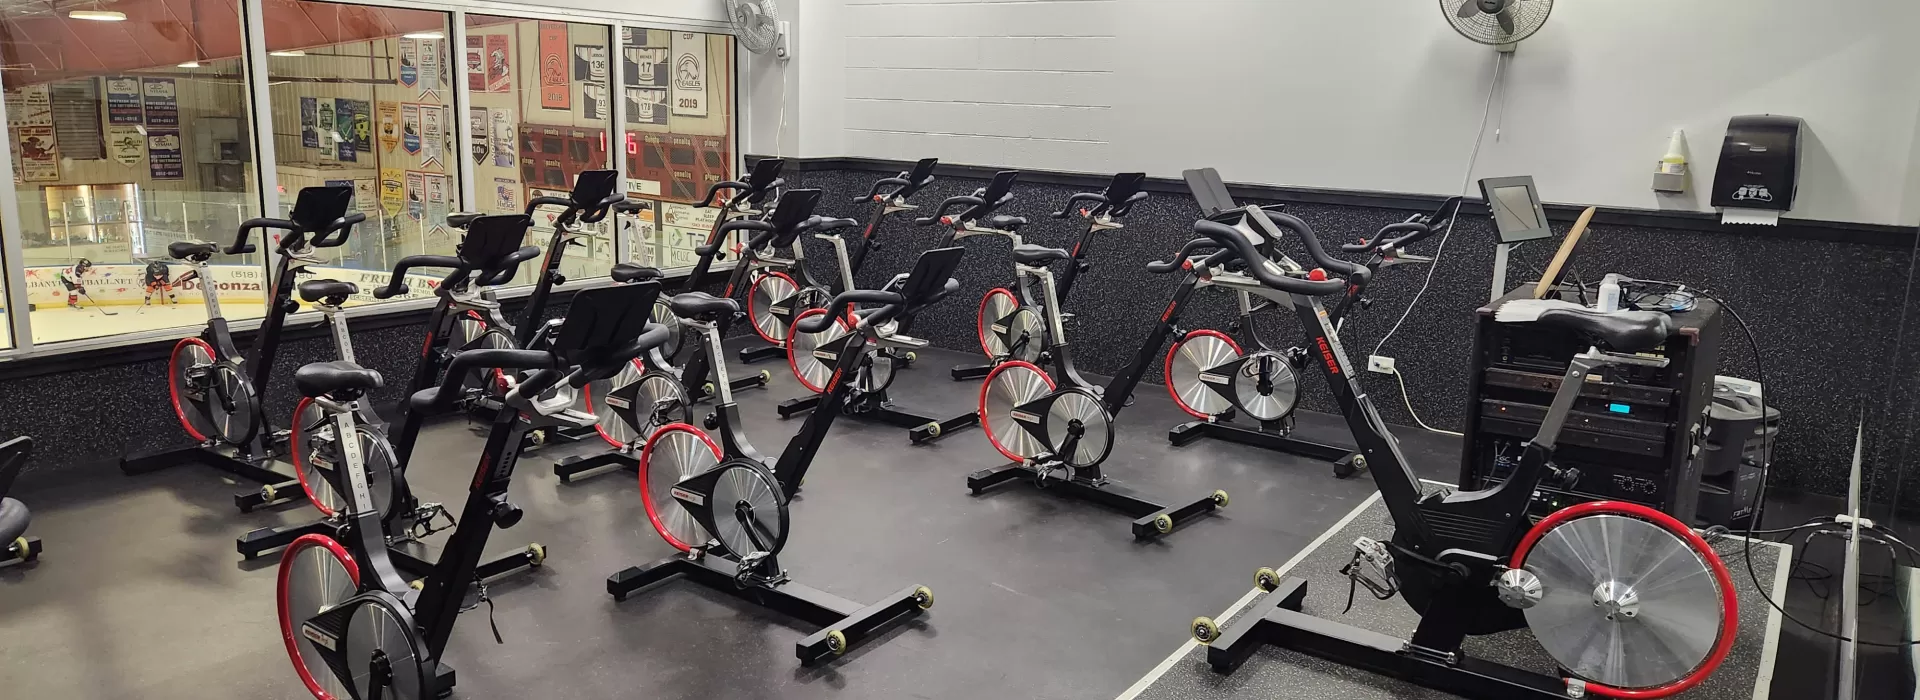 Spin bikes in a room